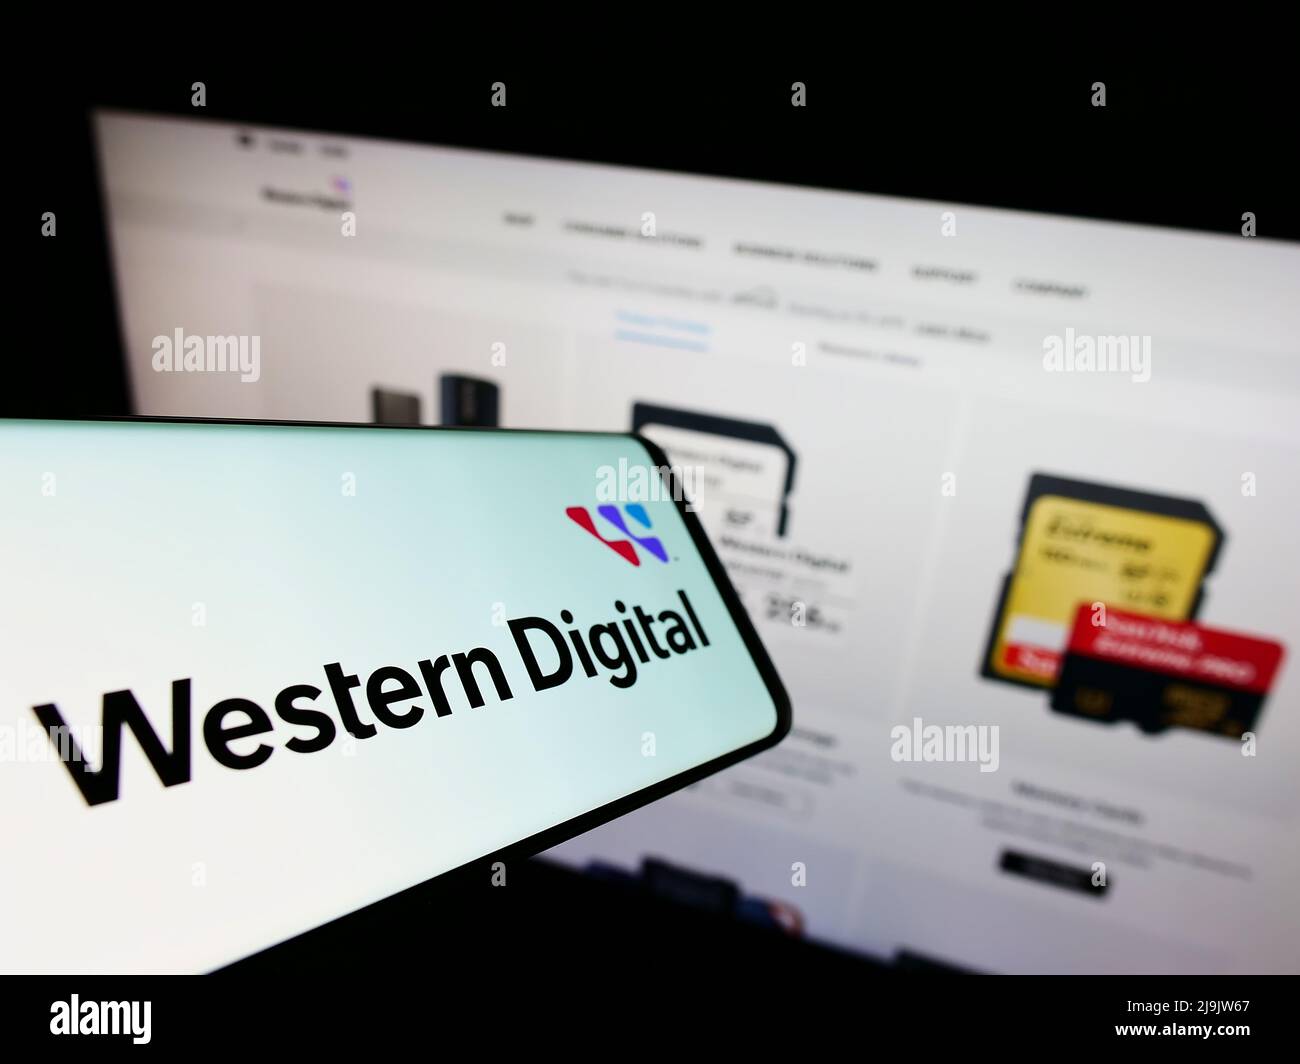 Mobile phone with logo of US company Western Digital Corporation (WDC) on screen in front of website. Focus on center-right of phone display. Stock Photo